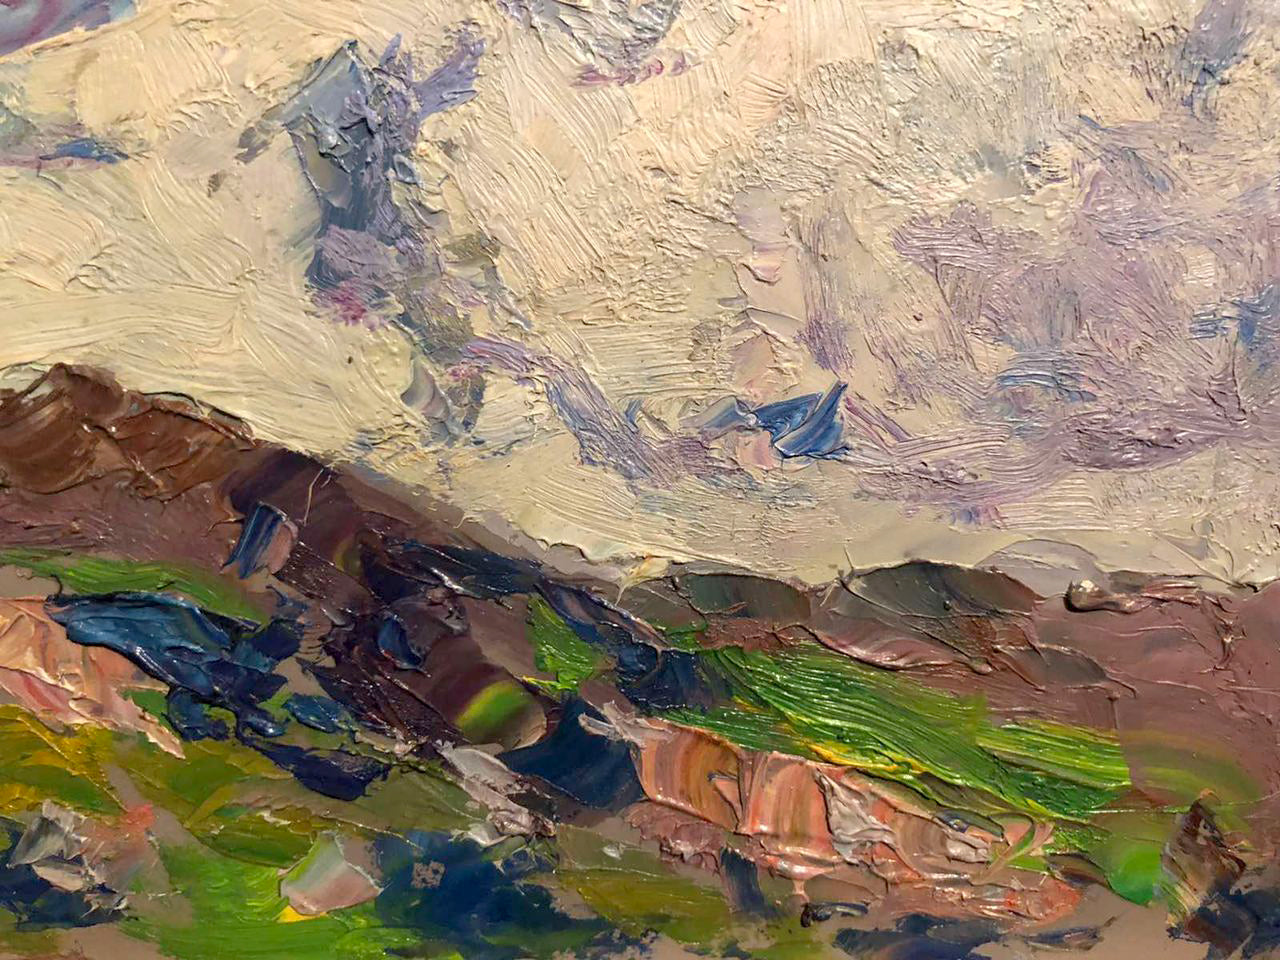 Clouds over the Mountains of Baikal, an oil painting by Yakov Alekseevich Kalatsyuk